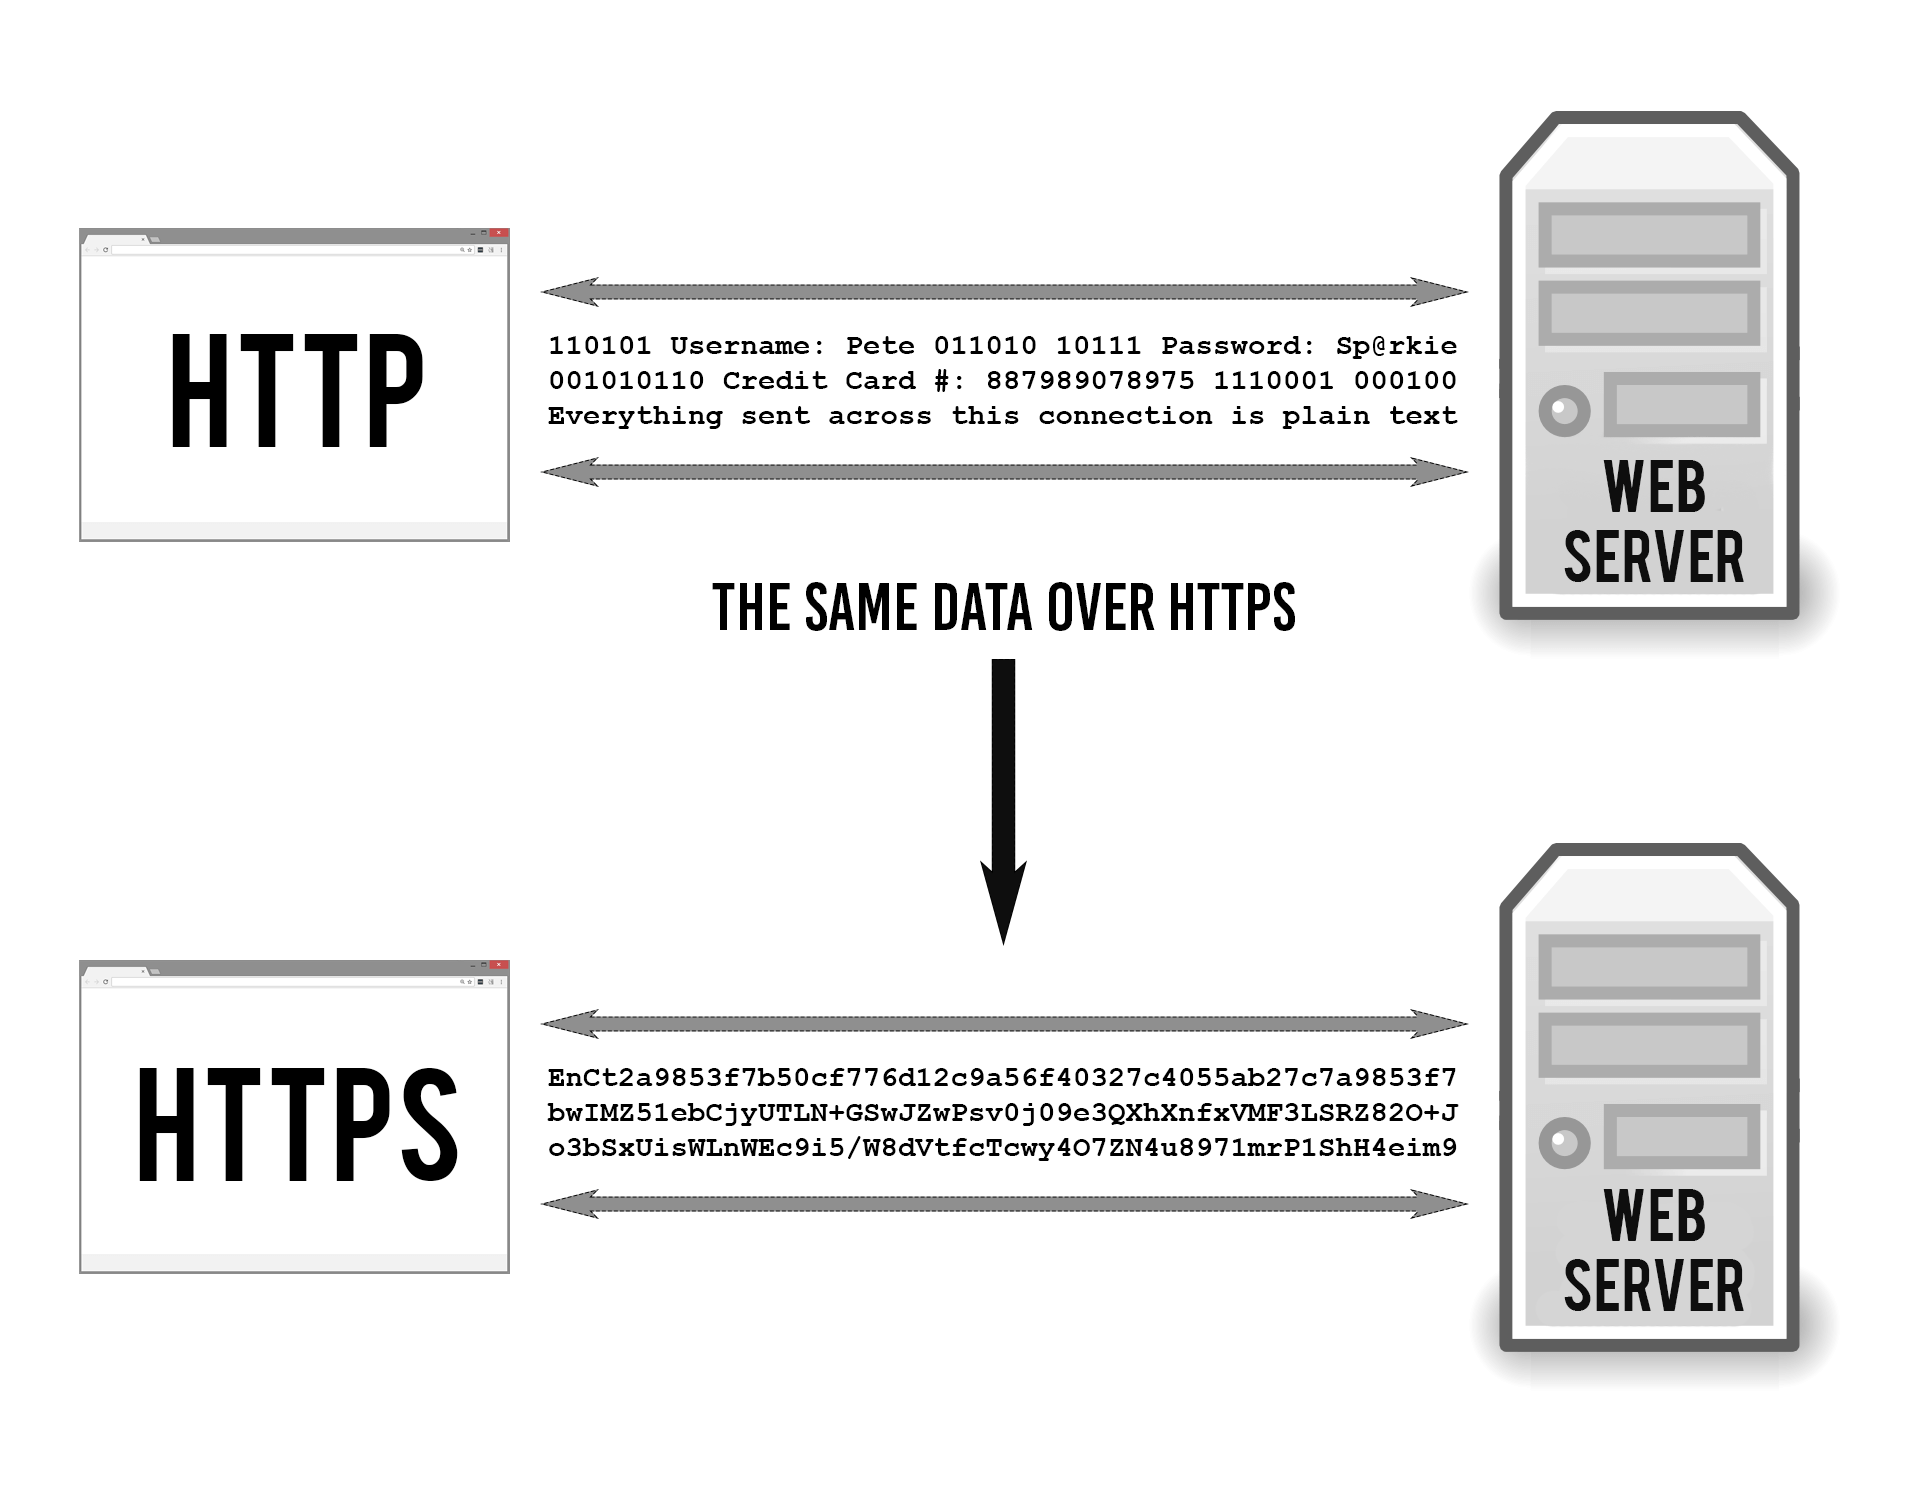 Http and HTTPS